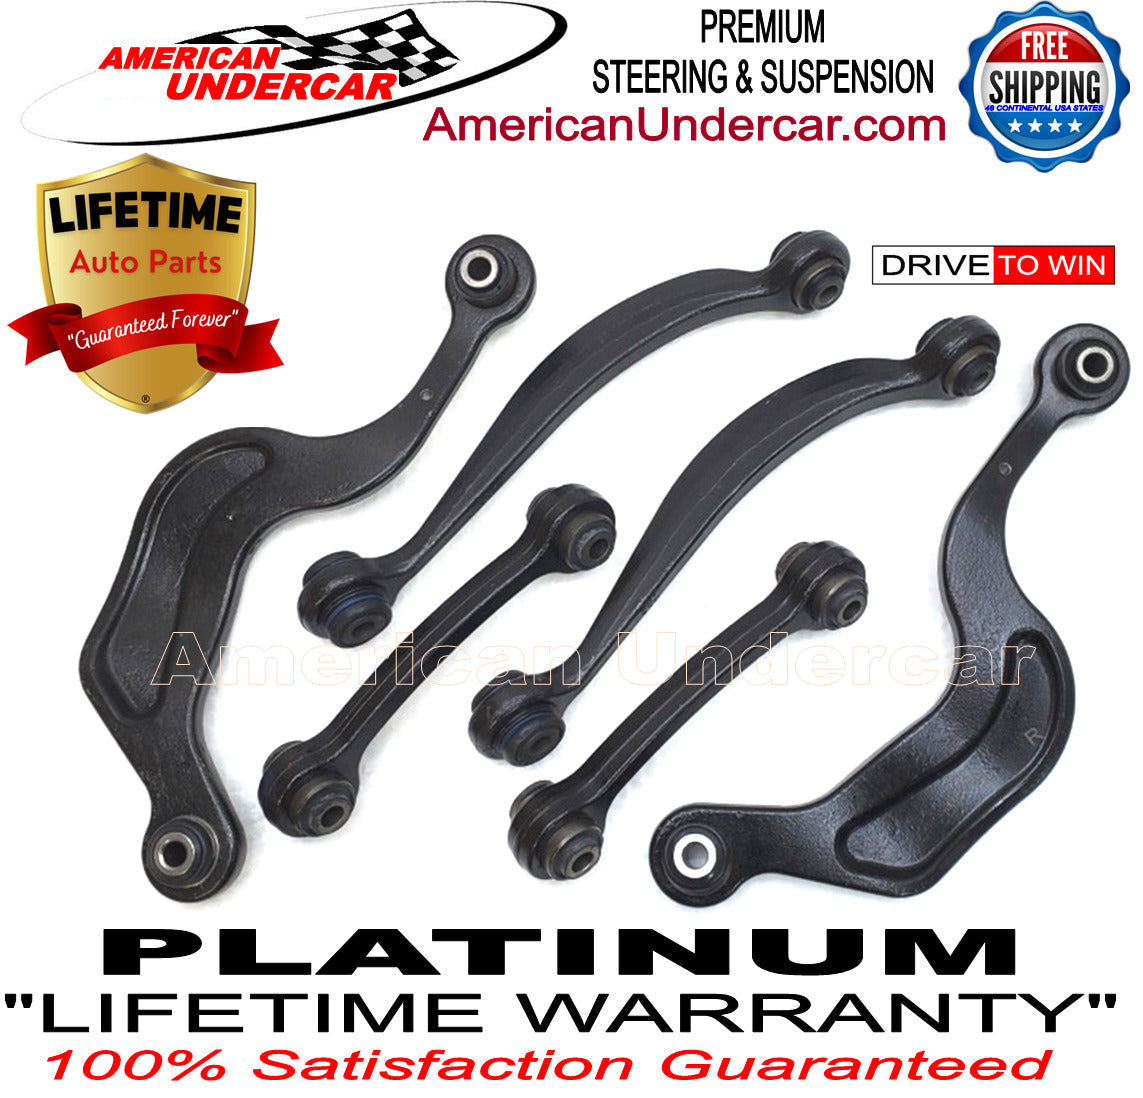 Lifetime Control Arm Link Rear Suspension Kit for 2007-2016 GMC Acadia 2WD, AWD